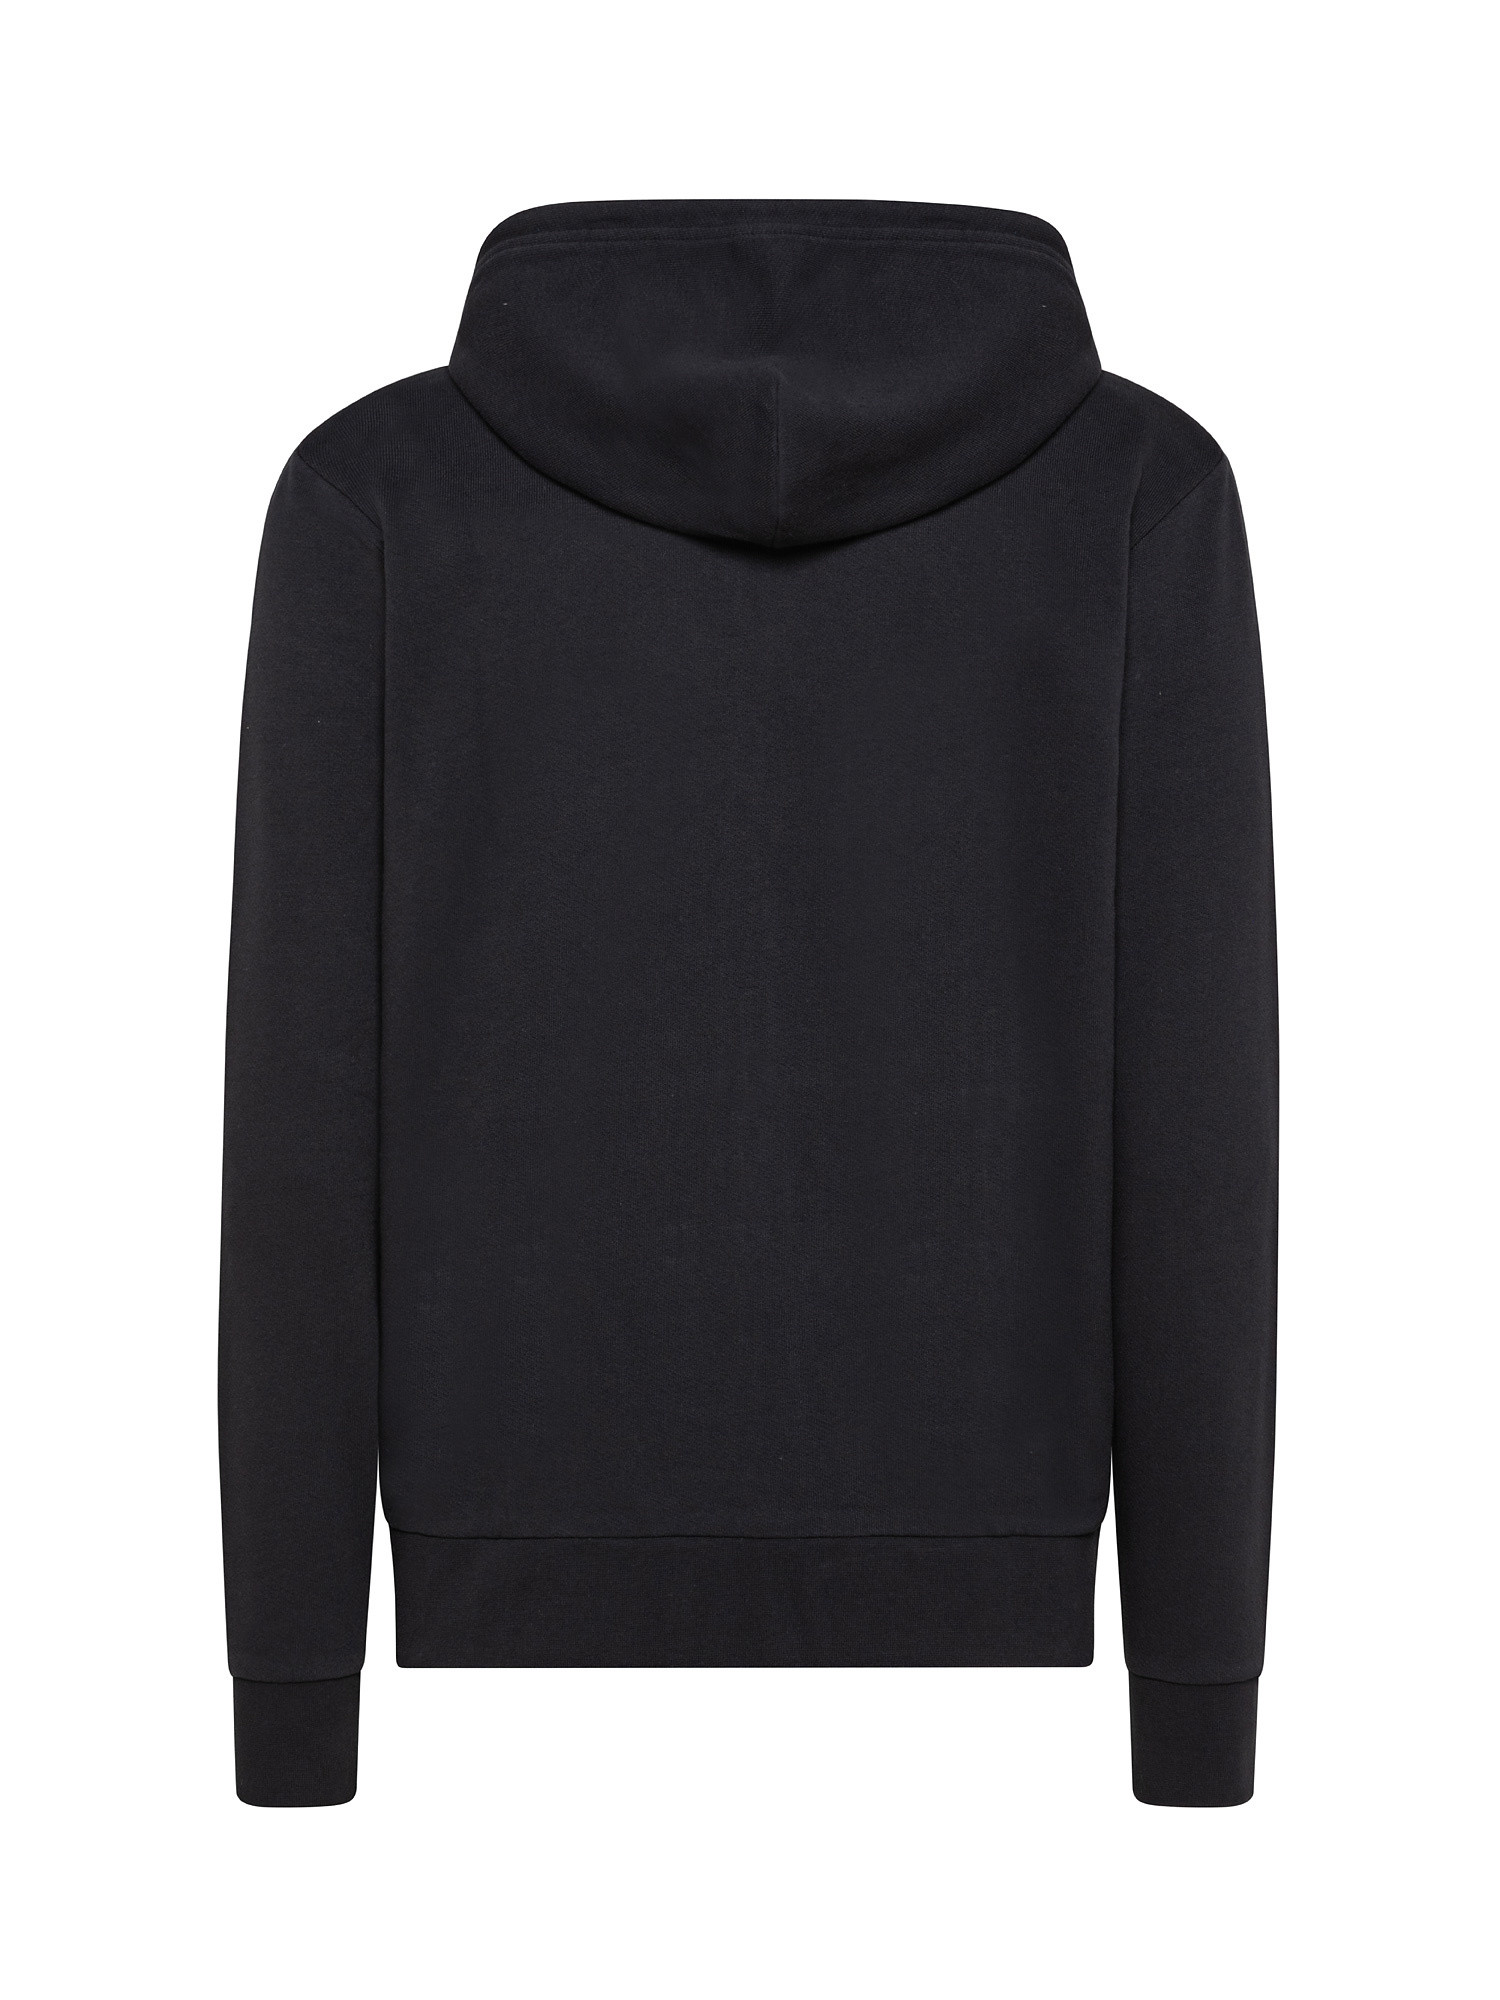 Fleece with zip and print, Black, large image number 1